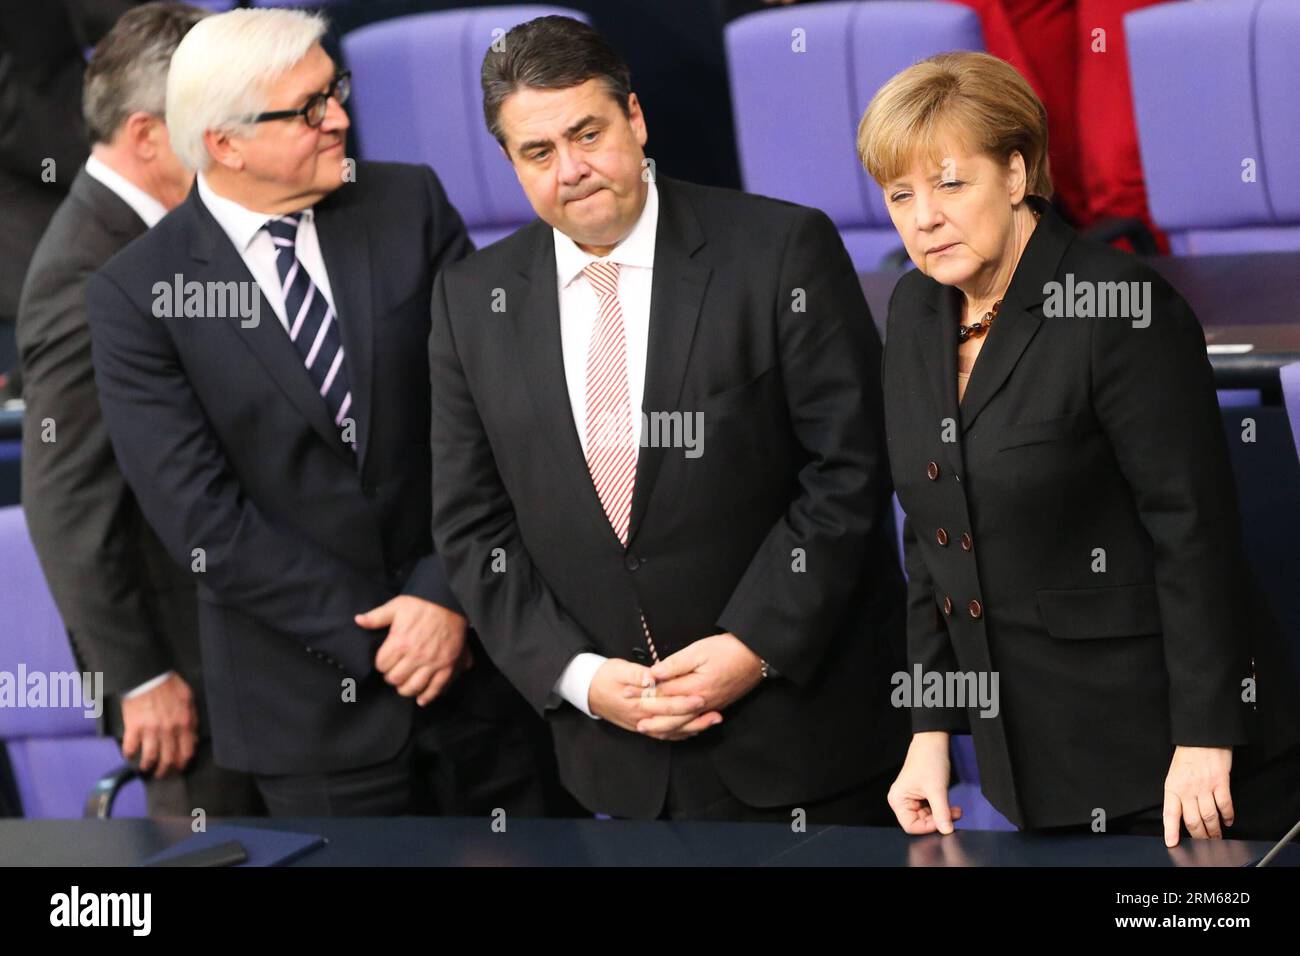 (131217) -- BERLIN, Dec. 17, 2013 (Xinhua) -- German Chancellor Angela Merkel (1st R) and German Vice-Chancellor and minister of economics and energy Sigmar Gabriel (2nd R) attend the meeting of Bundestag, Germany s lower house of parliament, in Berlin, Germany on Dec. 17, 2013. German new government headed by Chancellor Angela Merkel was sworn into office on Tuesday to rule Europe s biggest economy for the next four years. Cabinet ministers of the new coalition government, are formed by Merkel s Christian Democratic Union (CDU), its Bavarian sister party Chrisitian Social Union (CSU), and the Stock Photo